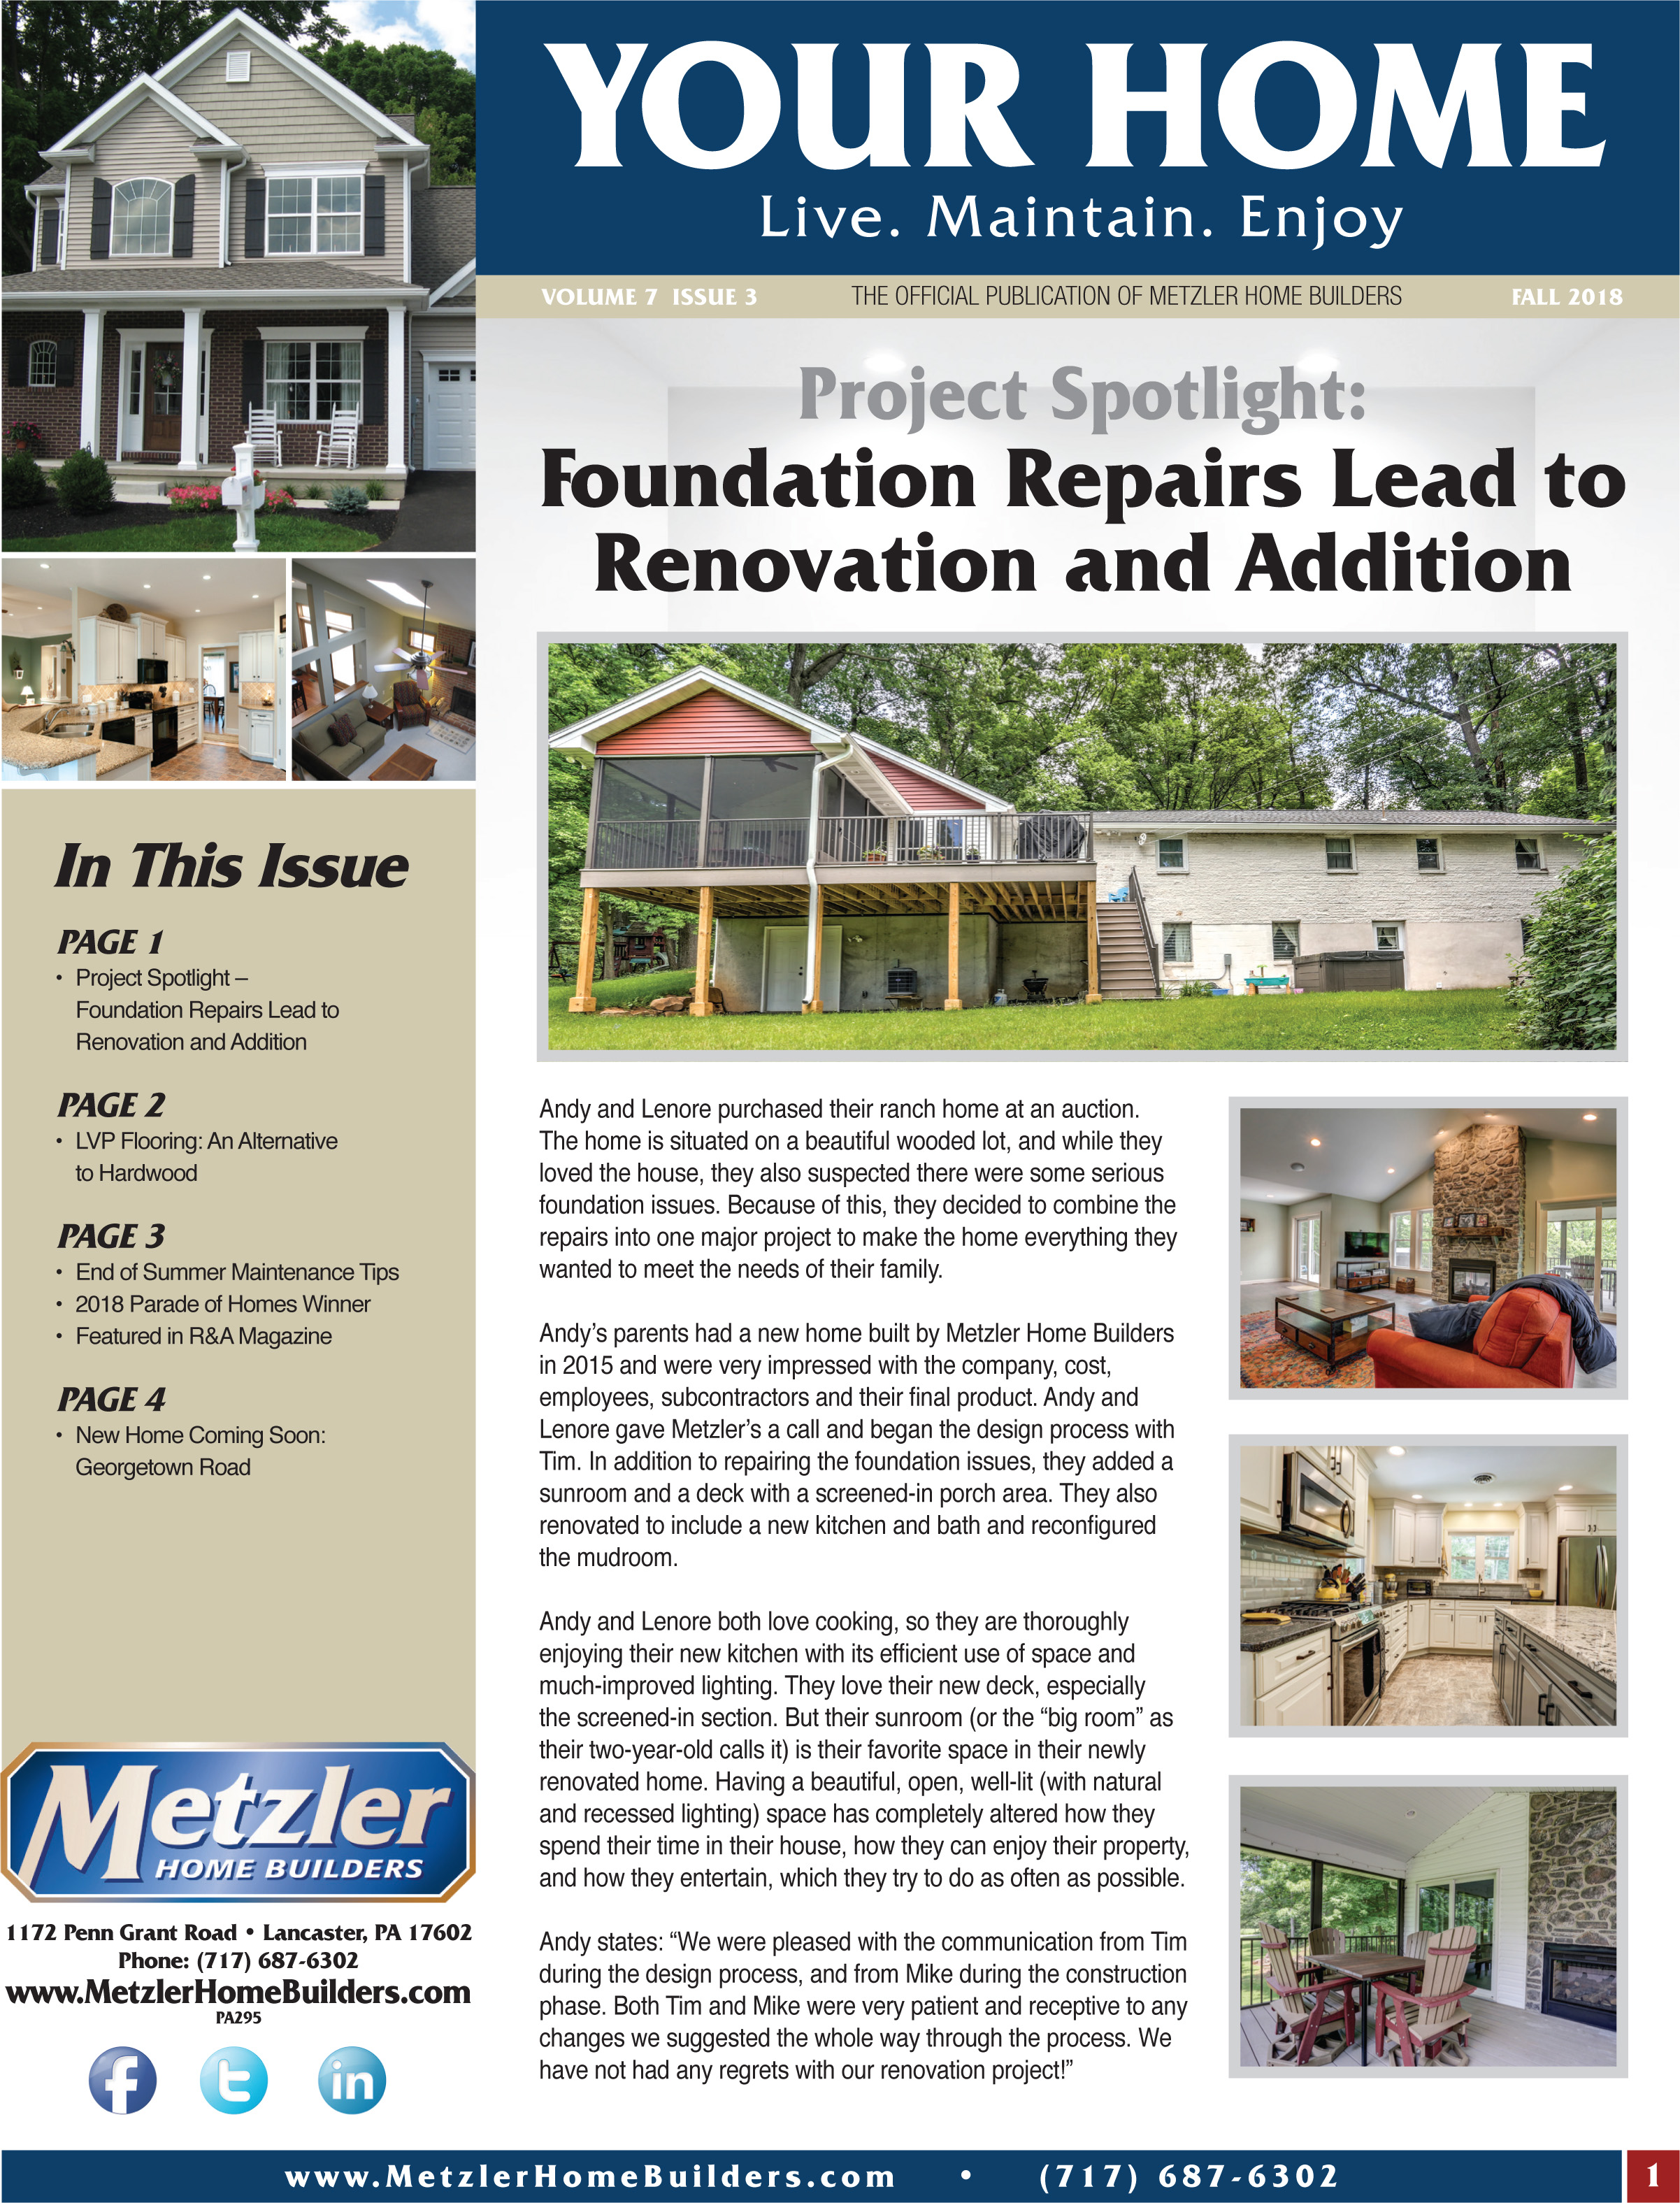 Metzler 'Your Home' Newsletter PDF cover for Volume 7 Issue 3